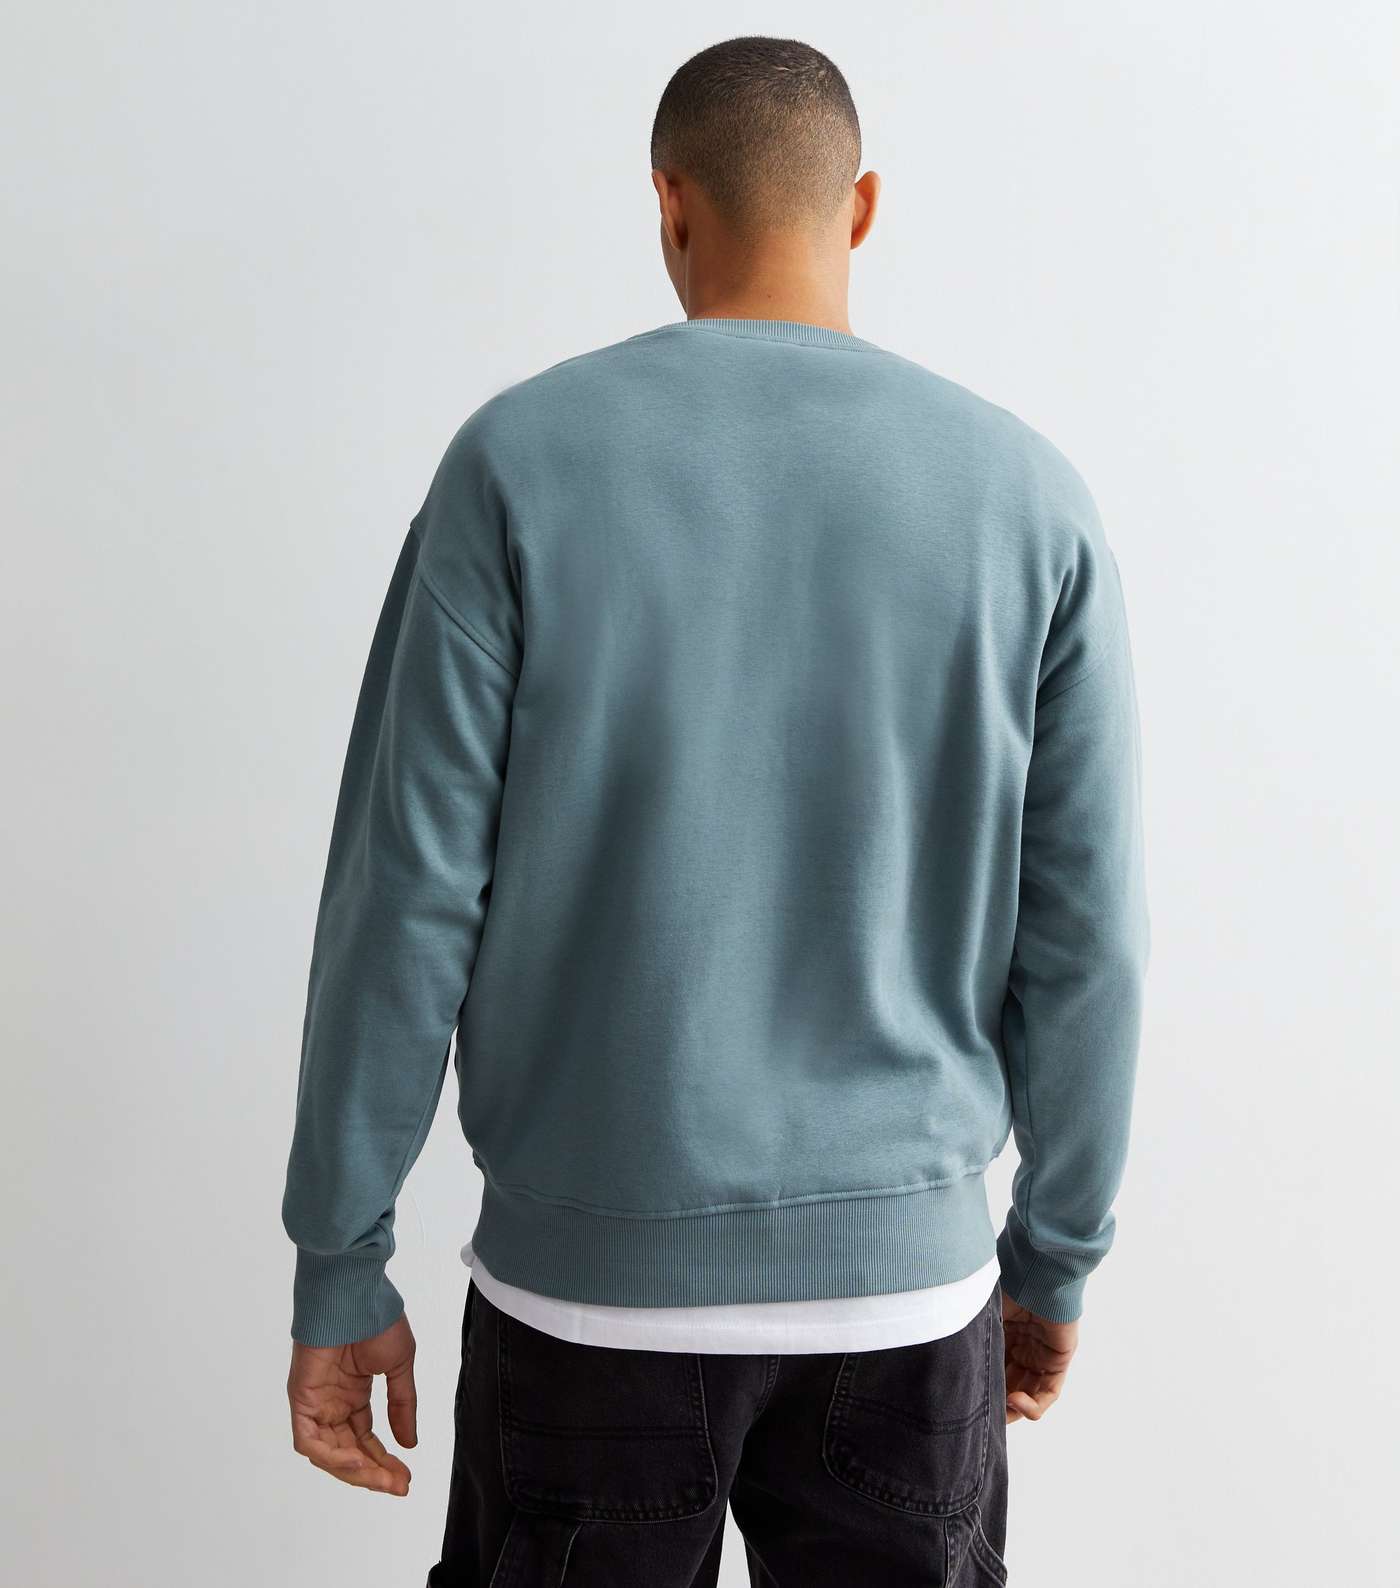 Teal Crew Neck Relaxed Fit Sweatshirt Image 4